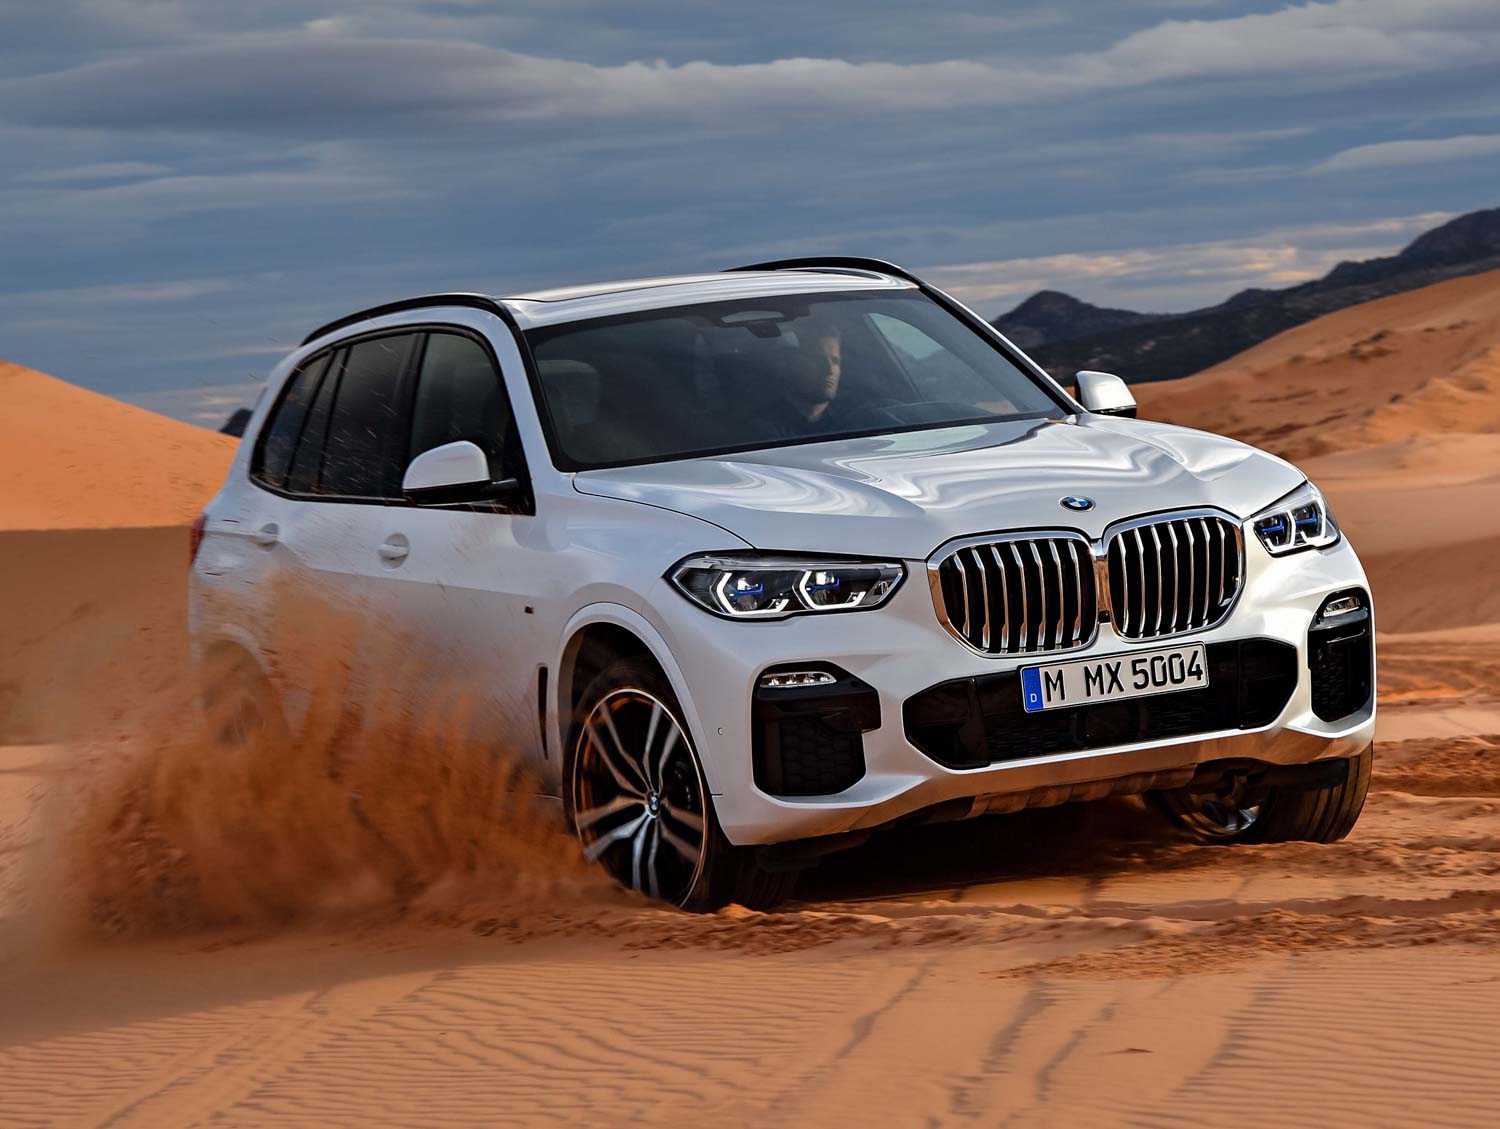 BMW X5 Starting Price Reduced By Rs. 8 Lakh In India - Details